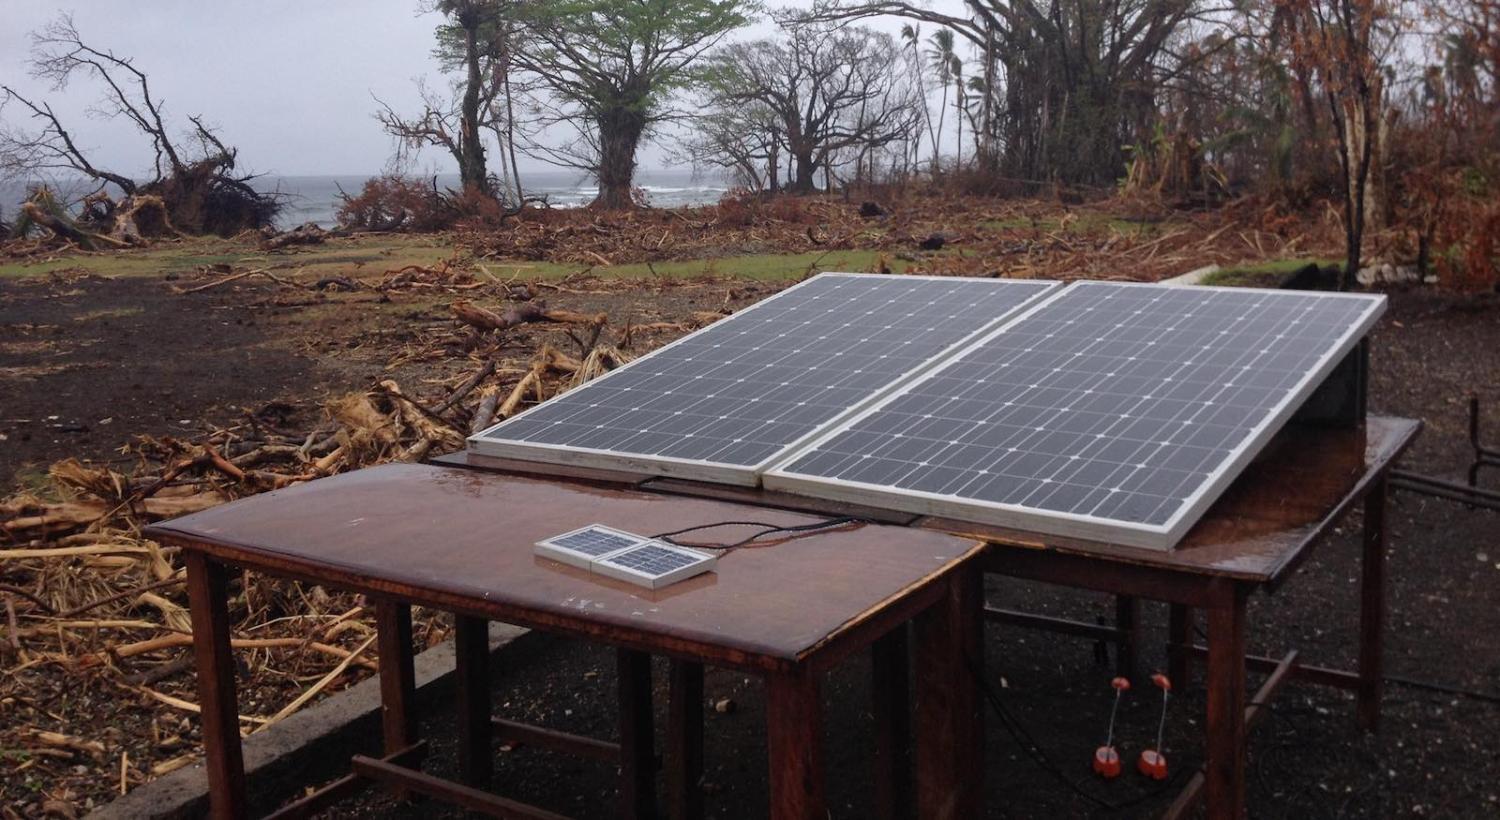 Solar panels can be readily deployed for electricity - whether to charge a mobile phone or here, in Vanuatu in 2015 following Cyclone Pam (Photo: UNDP)